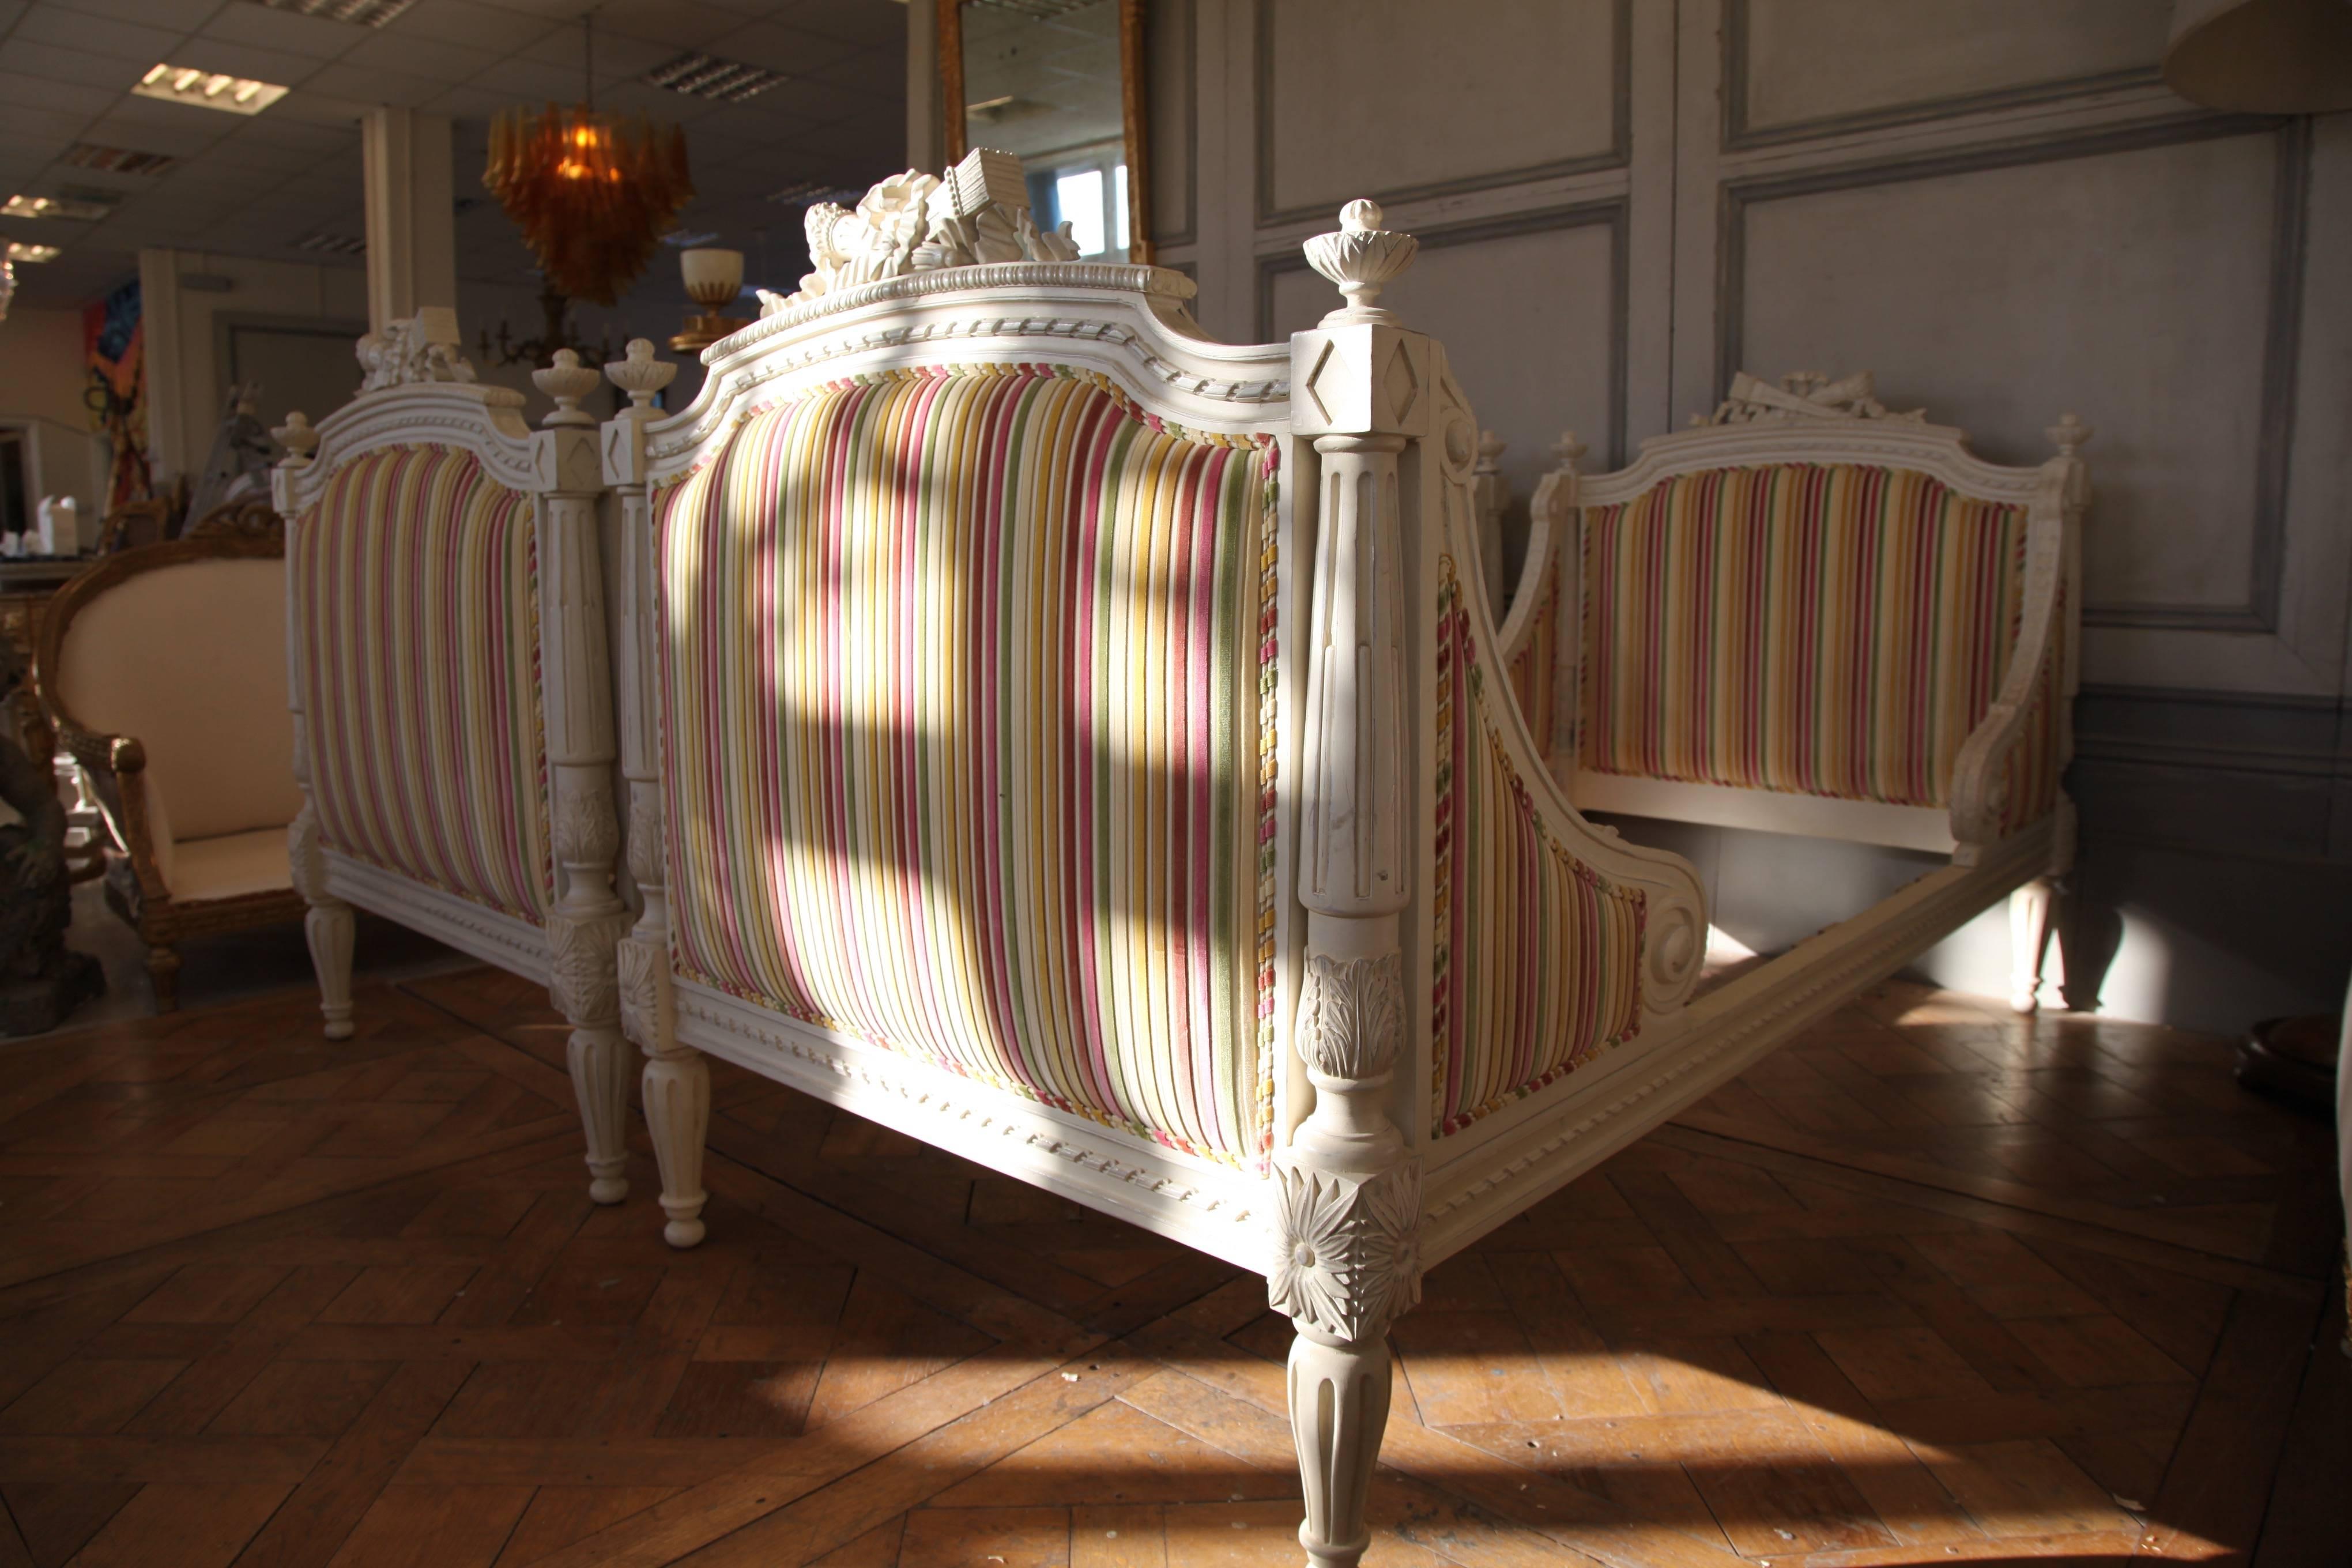 British Louis XVI Style Bunk Beds/Matching Pair of Single Beds Made by La Maison London For Sale